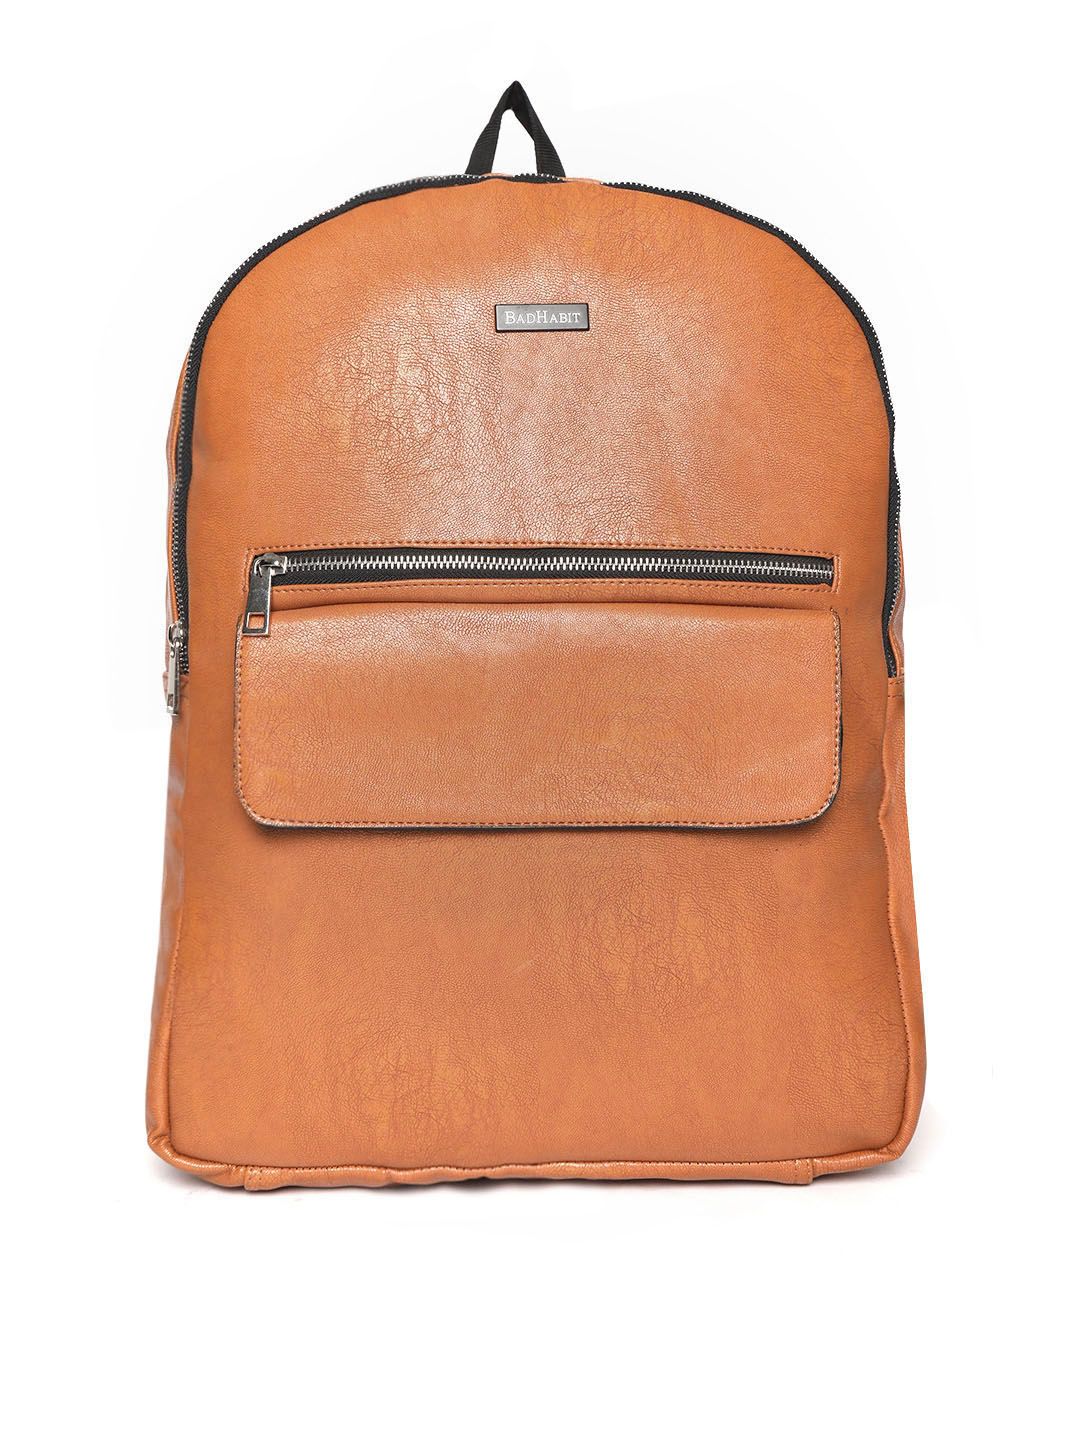 BAD HABIT Unisex Tan Brown Solid Laptop Backpack Price in India